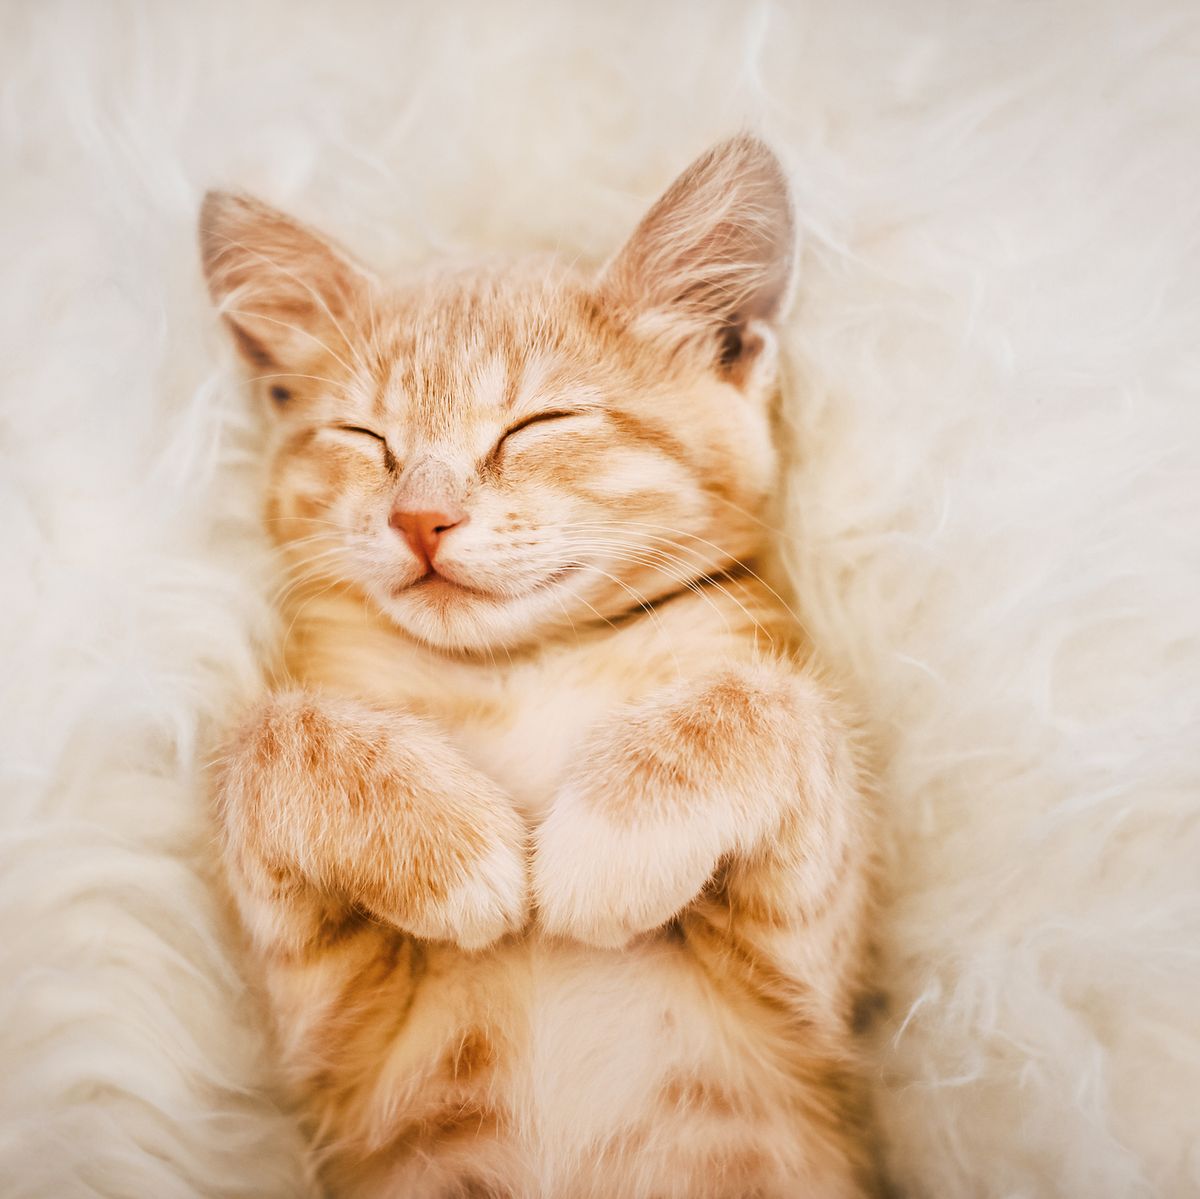 Cute Cat Names: 🐈 Find the Perfect Name for Your Feline